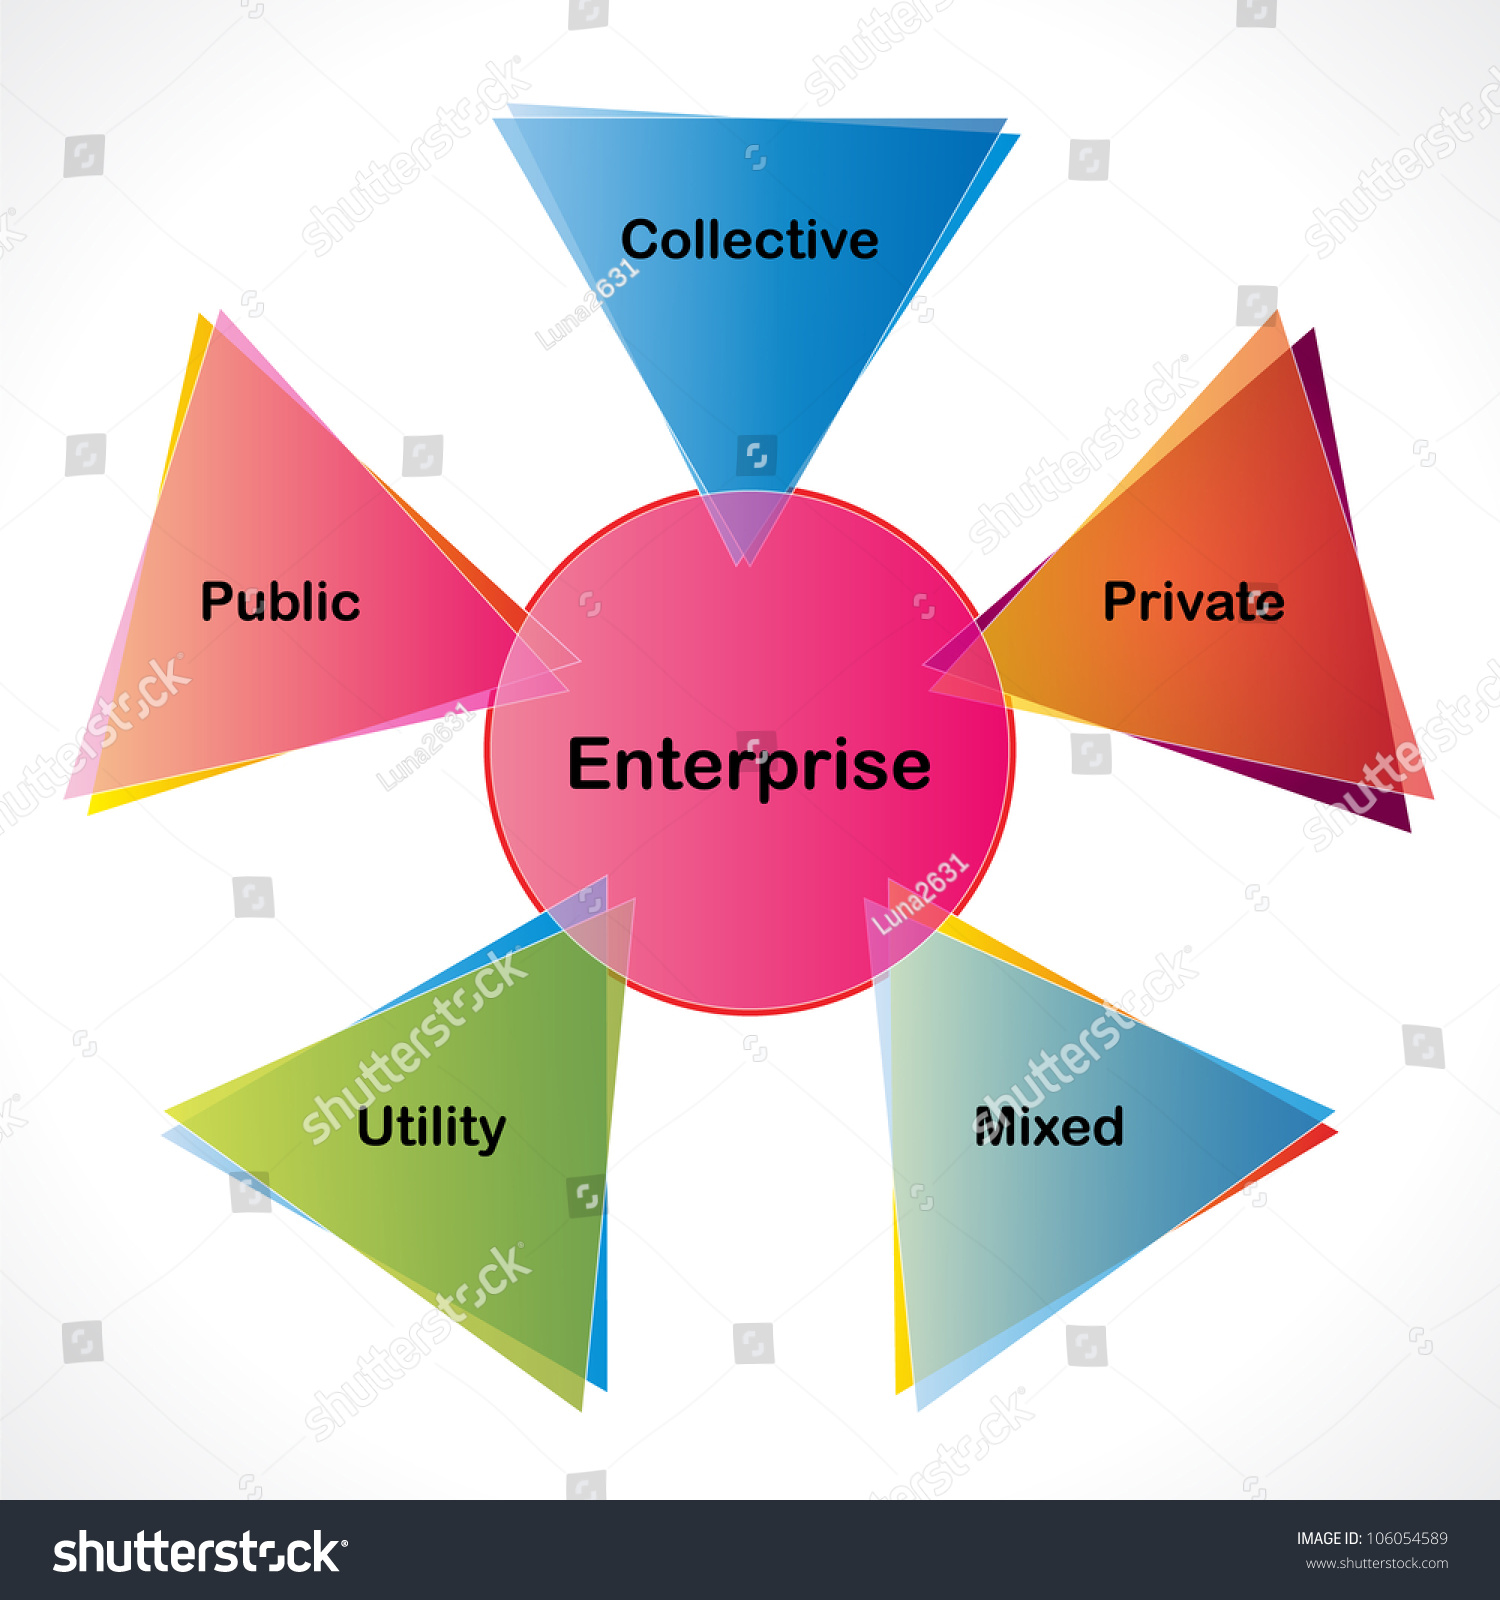 Types Of Enterprises Diagram. Vector Version Is Also Available In This